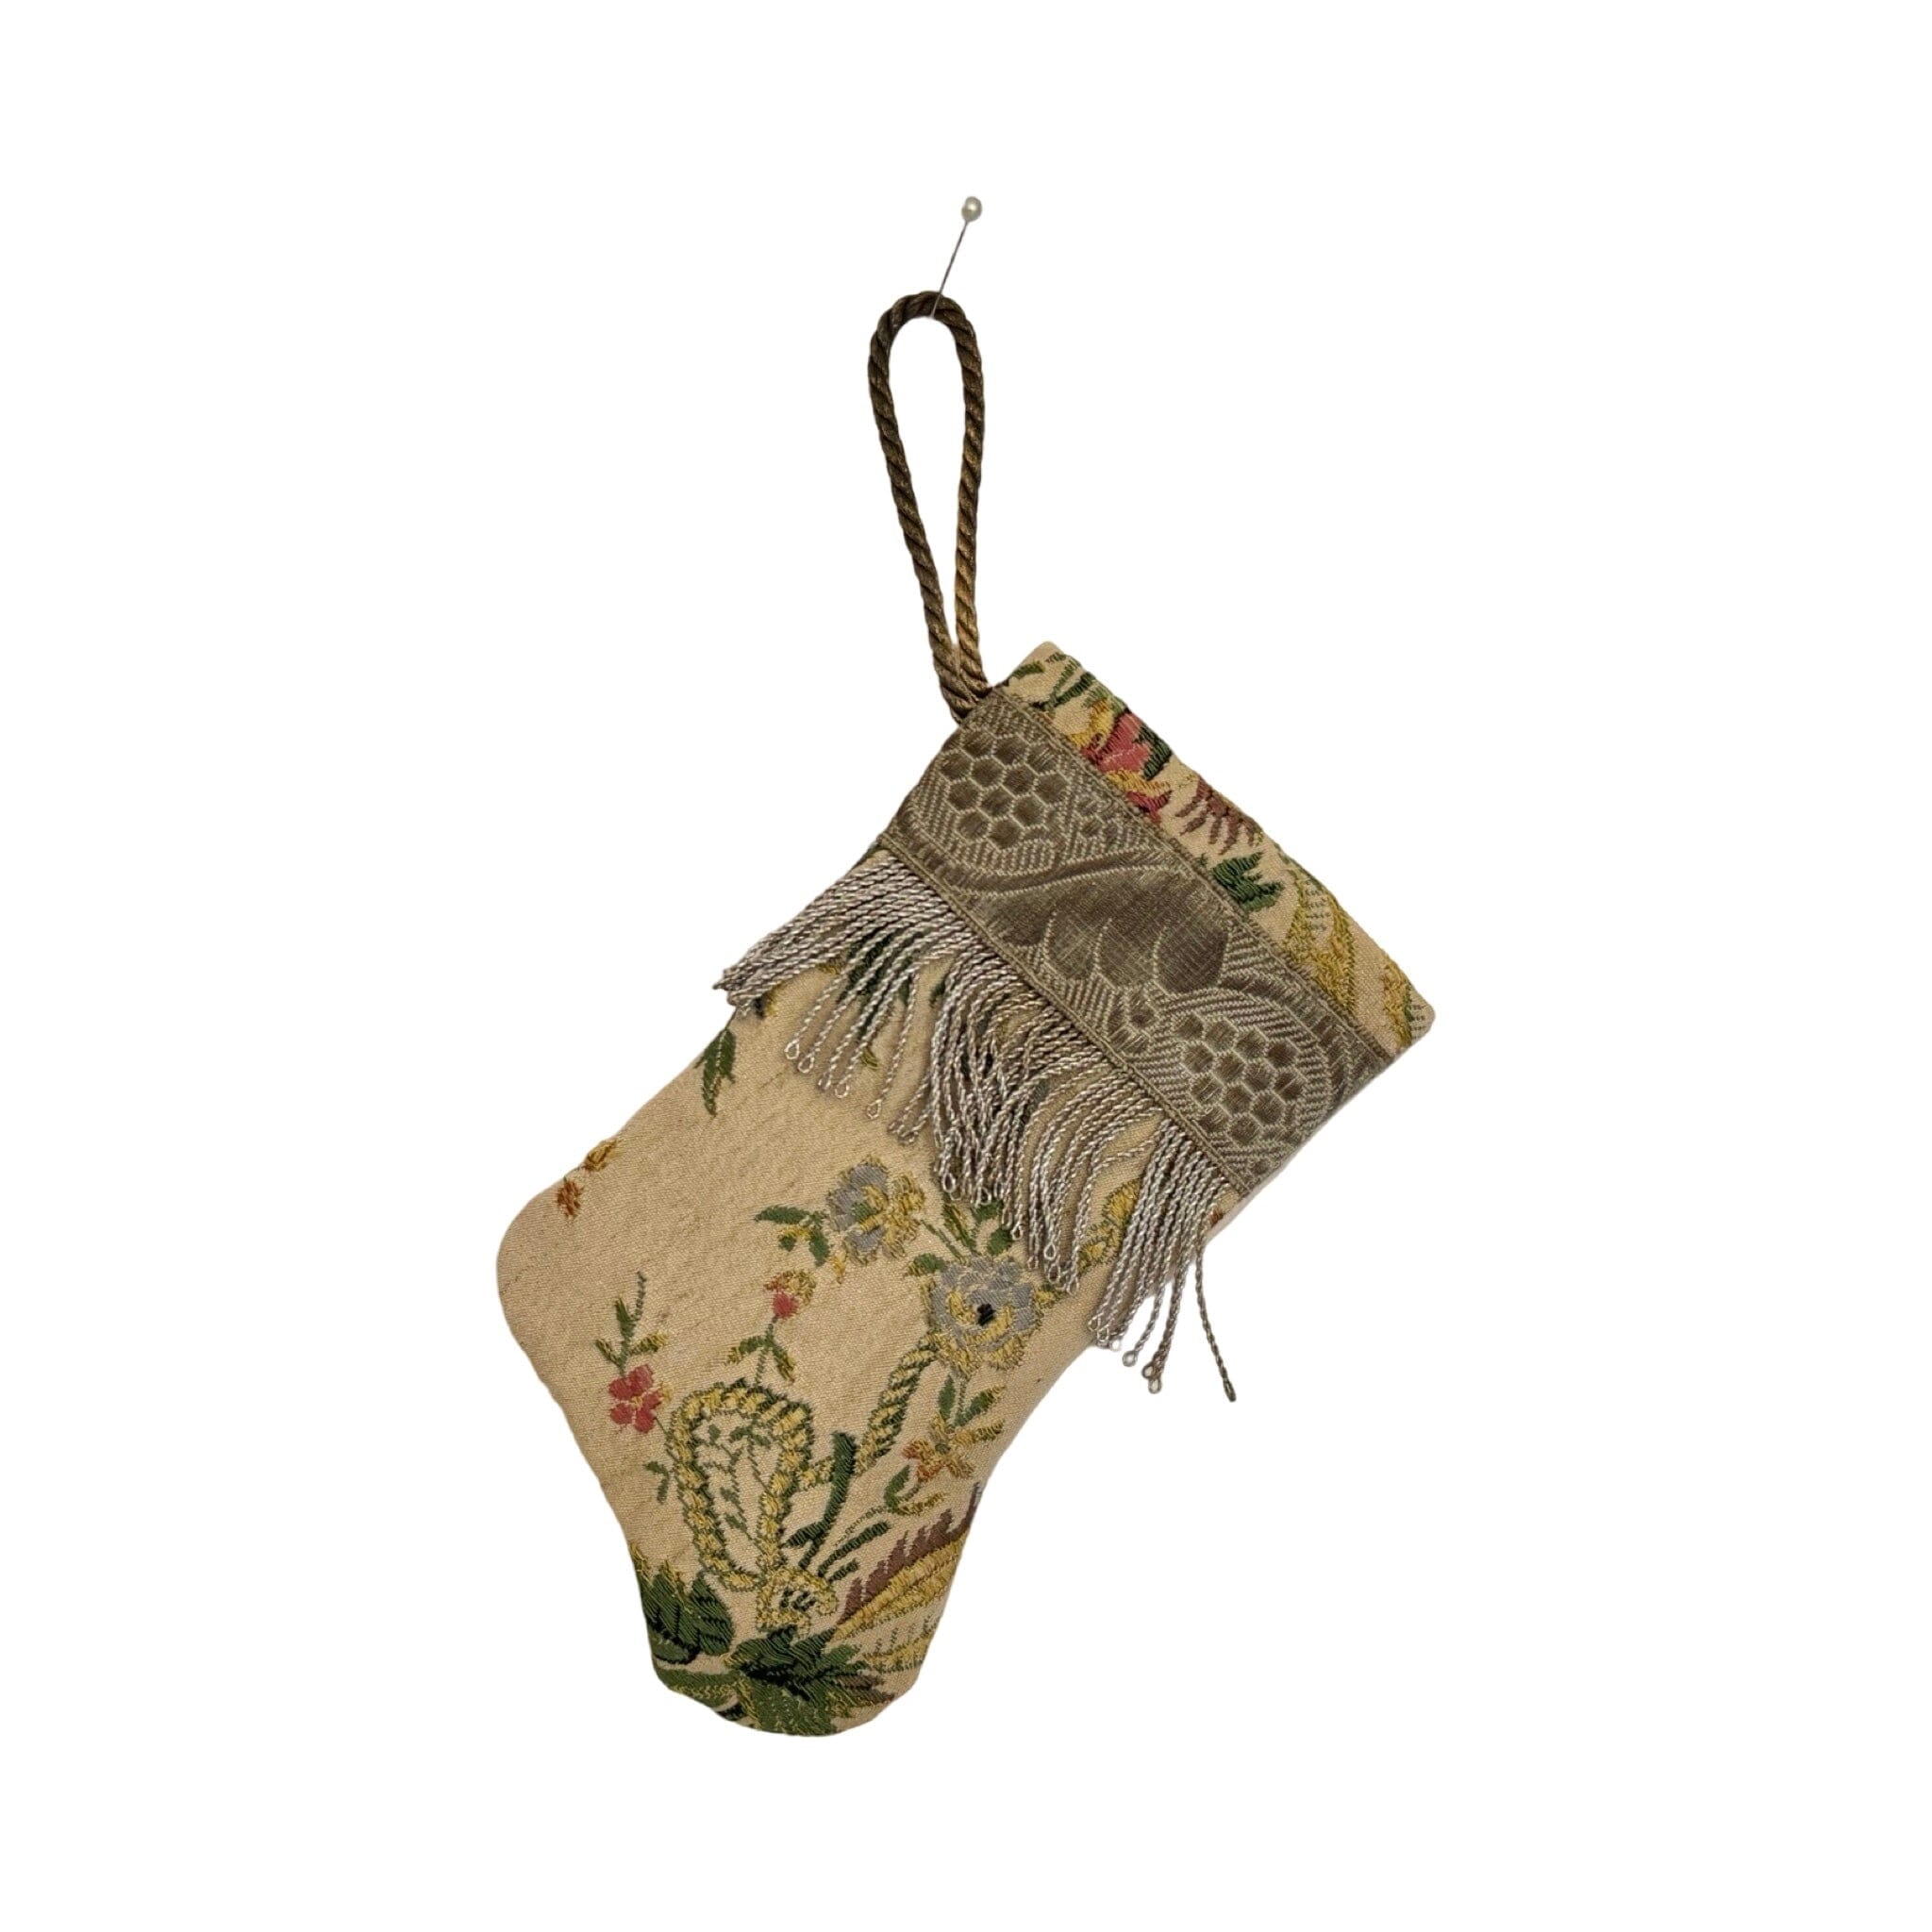 Handmade Mini Stocking Made From Vintage Fabric and Trims- Antique Sand Floral Ornament B. Viz Design C 